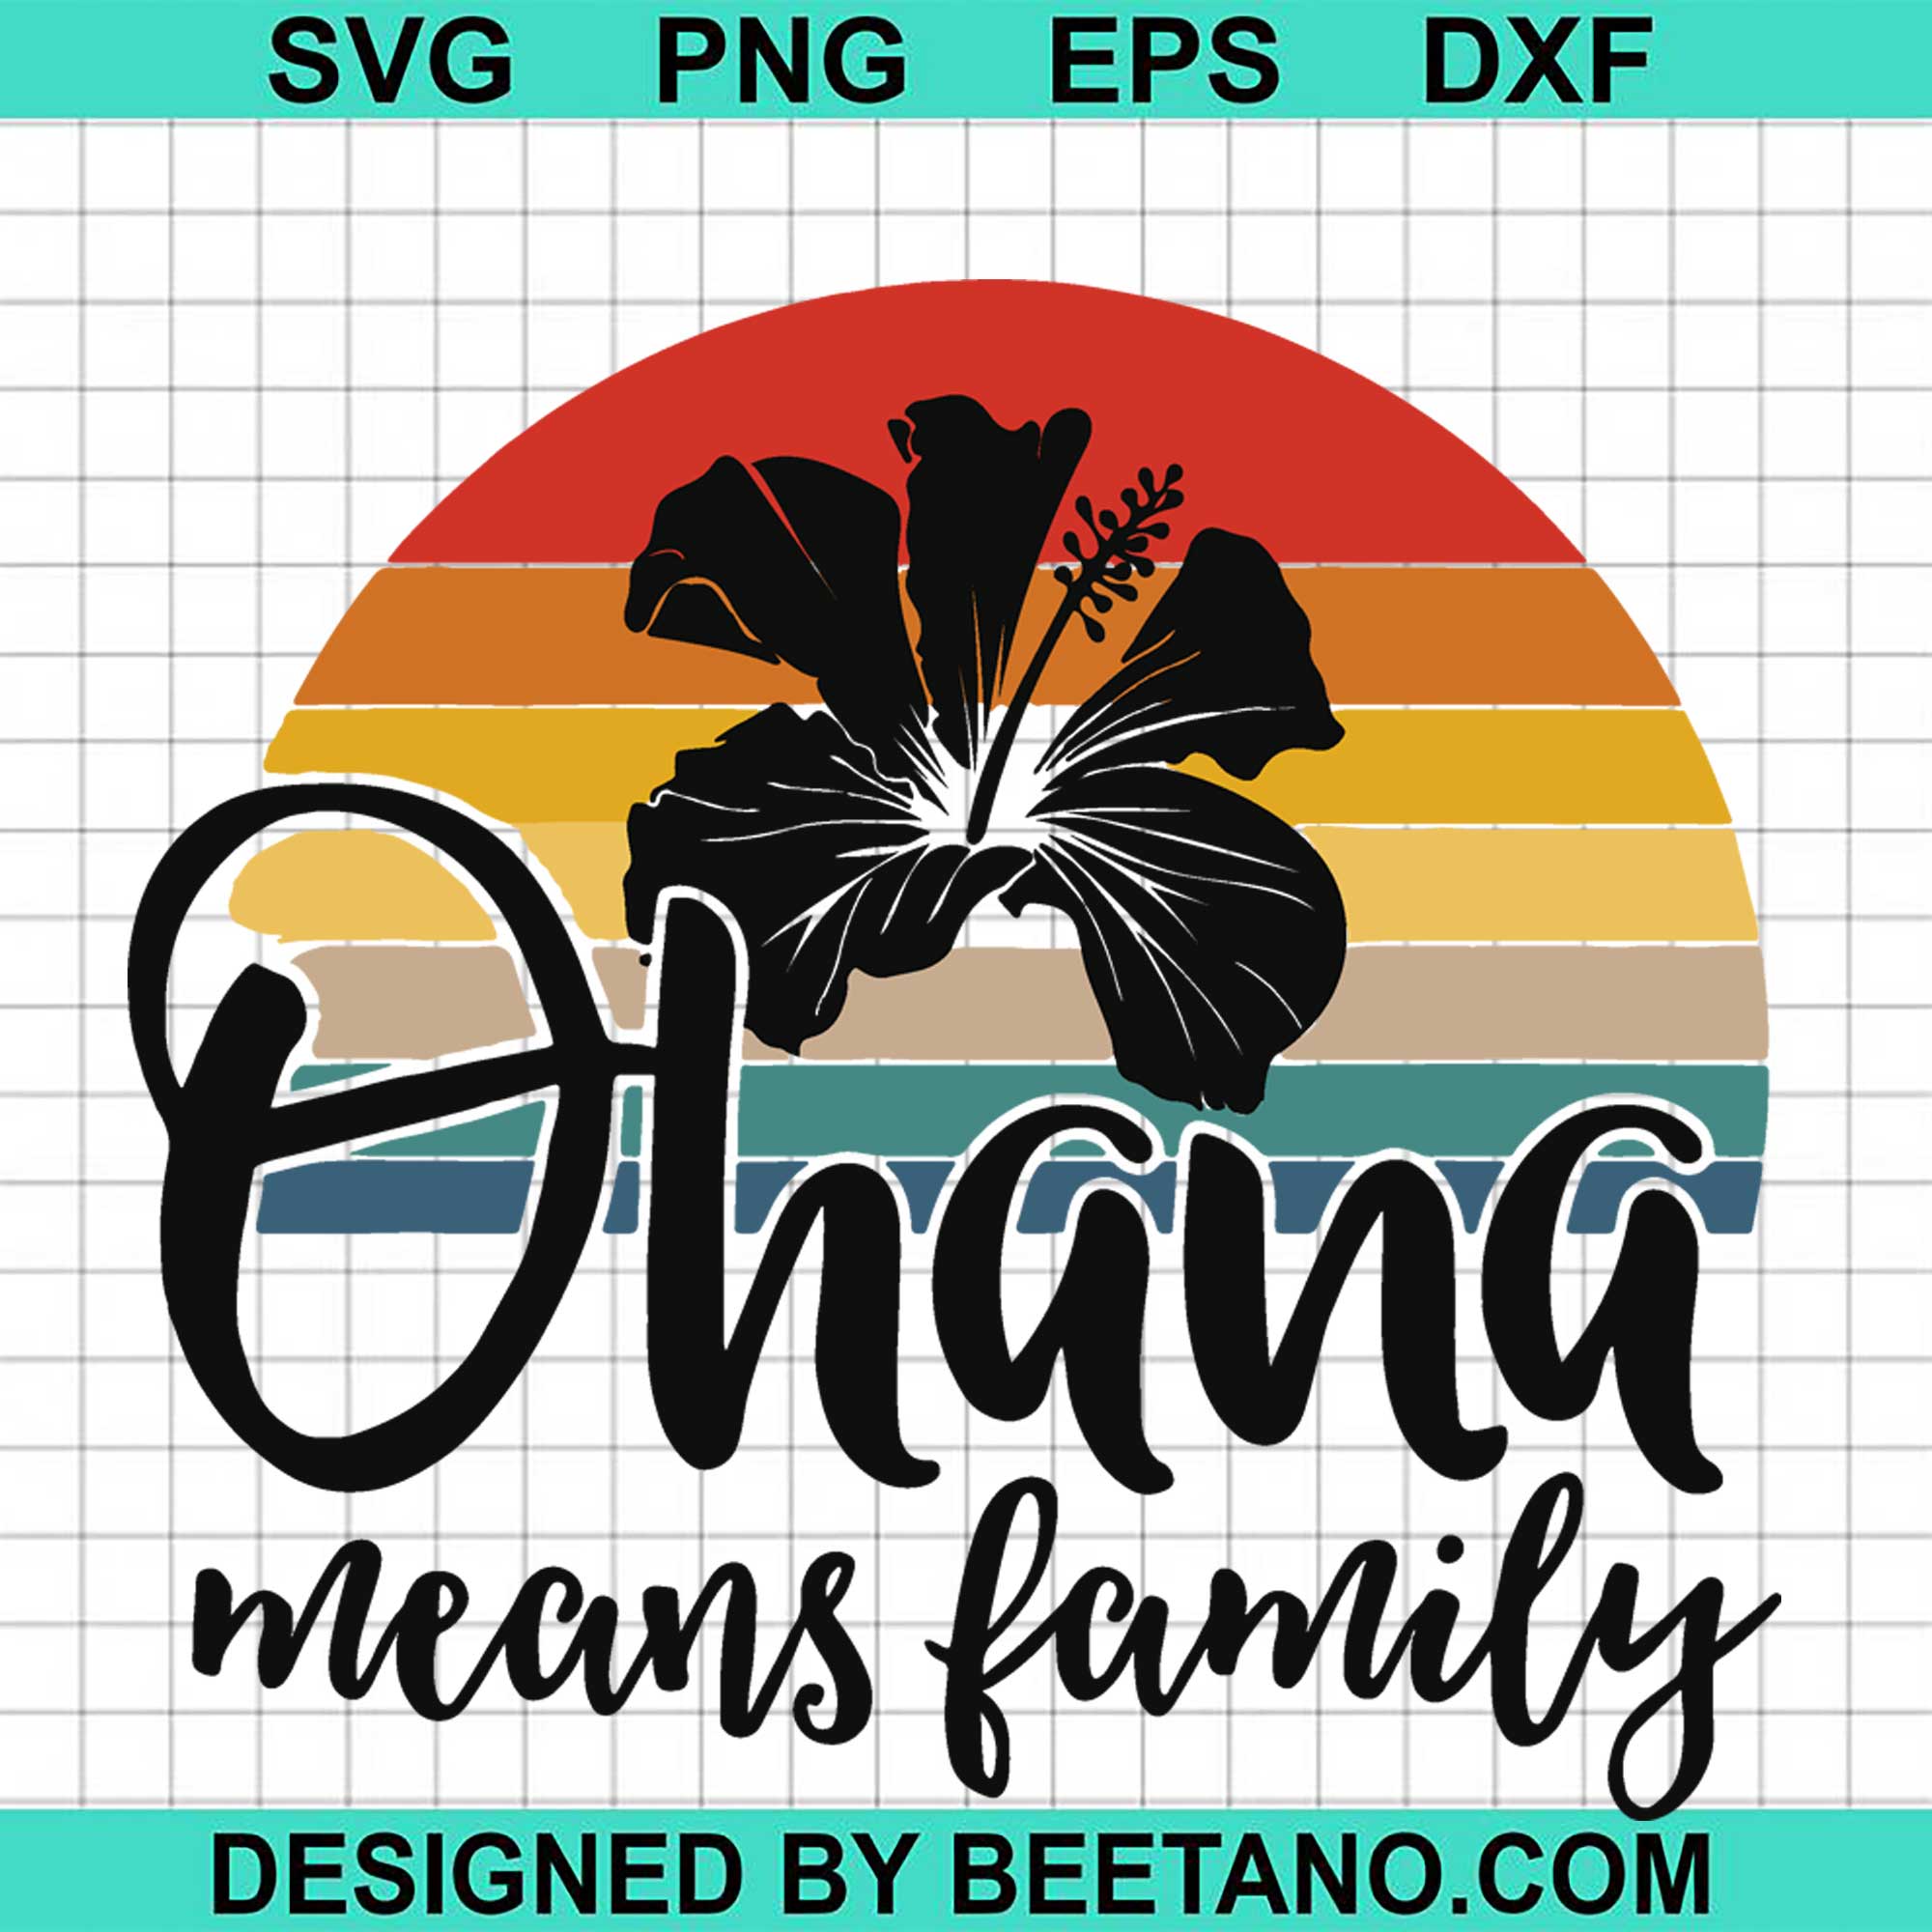 Download Ohana Means Family Svg Cut File For Cricut Silhouette Machine Make Cra